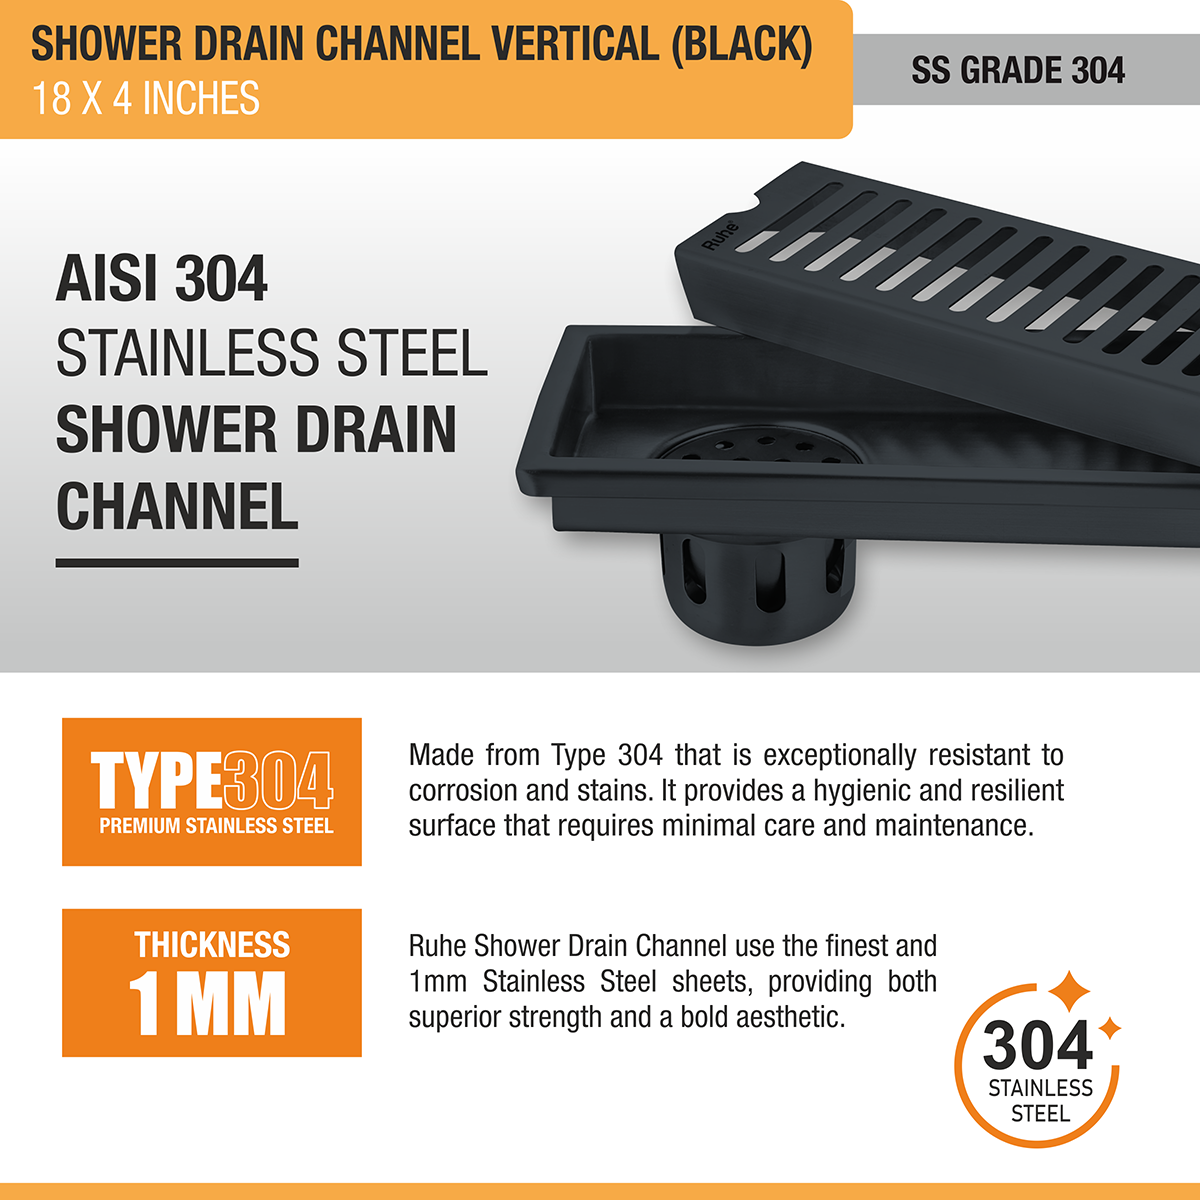 Vertical Shower Drain Channel (18 x 4 Inches) Black PVD Coated stainless steel